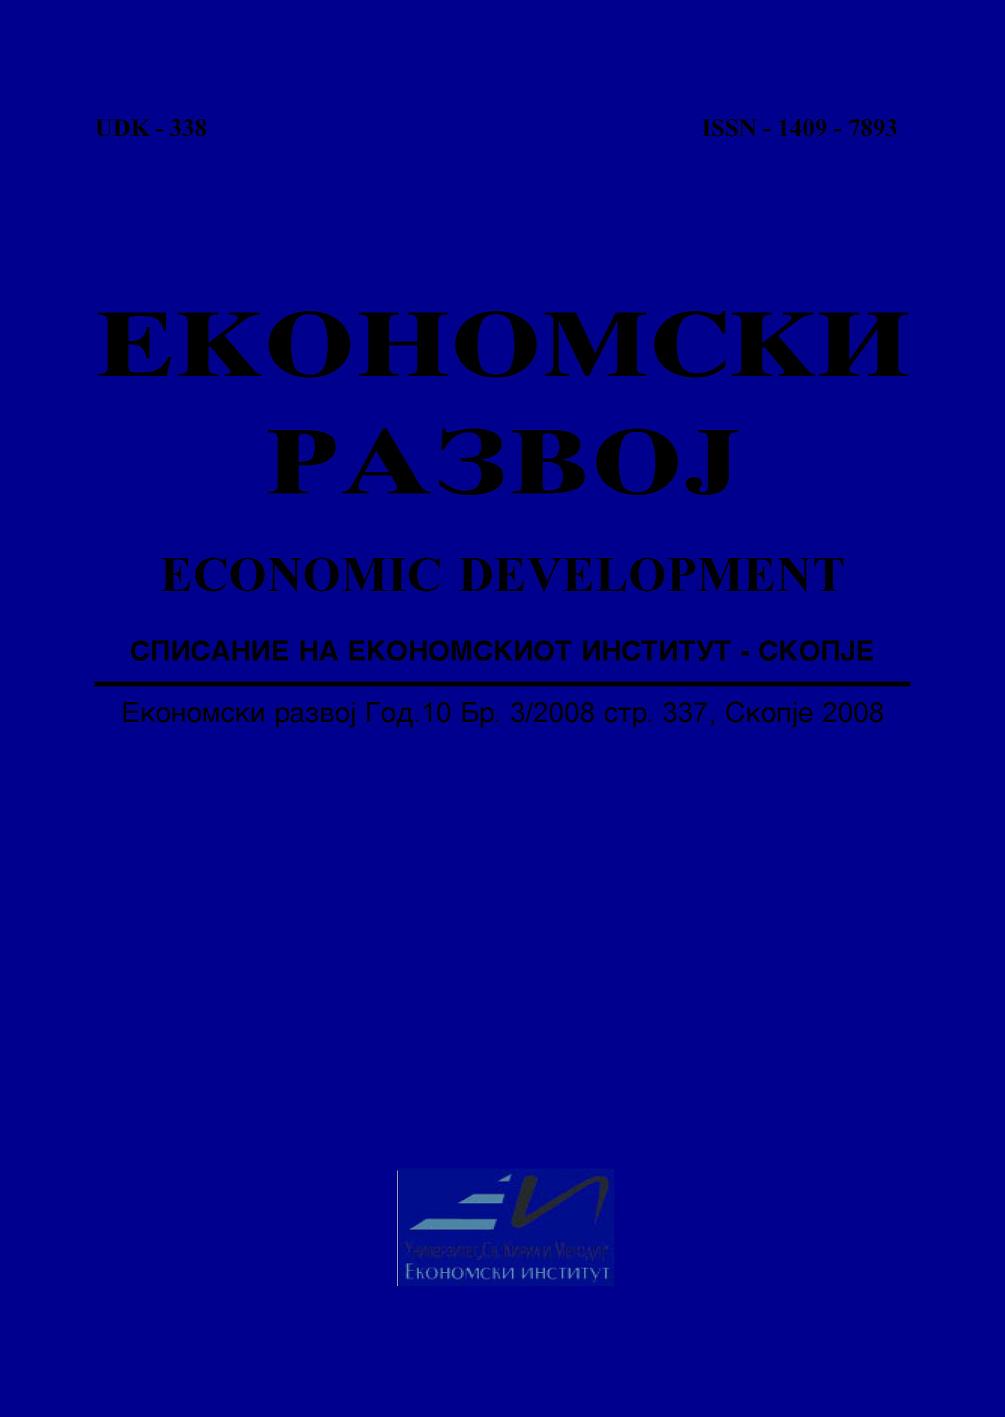 MACROECONOMIC AND FINANCIAL ASPECTS OF "GRAY ECONOMY" IN THE REPUBLIC OF MACEDONIA Cover Image